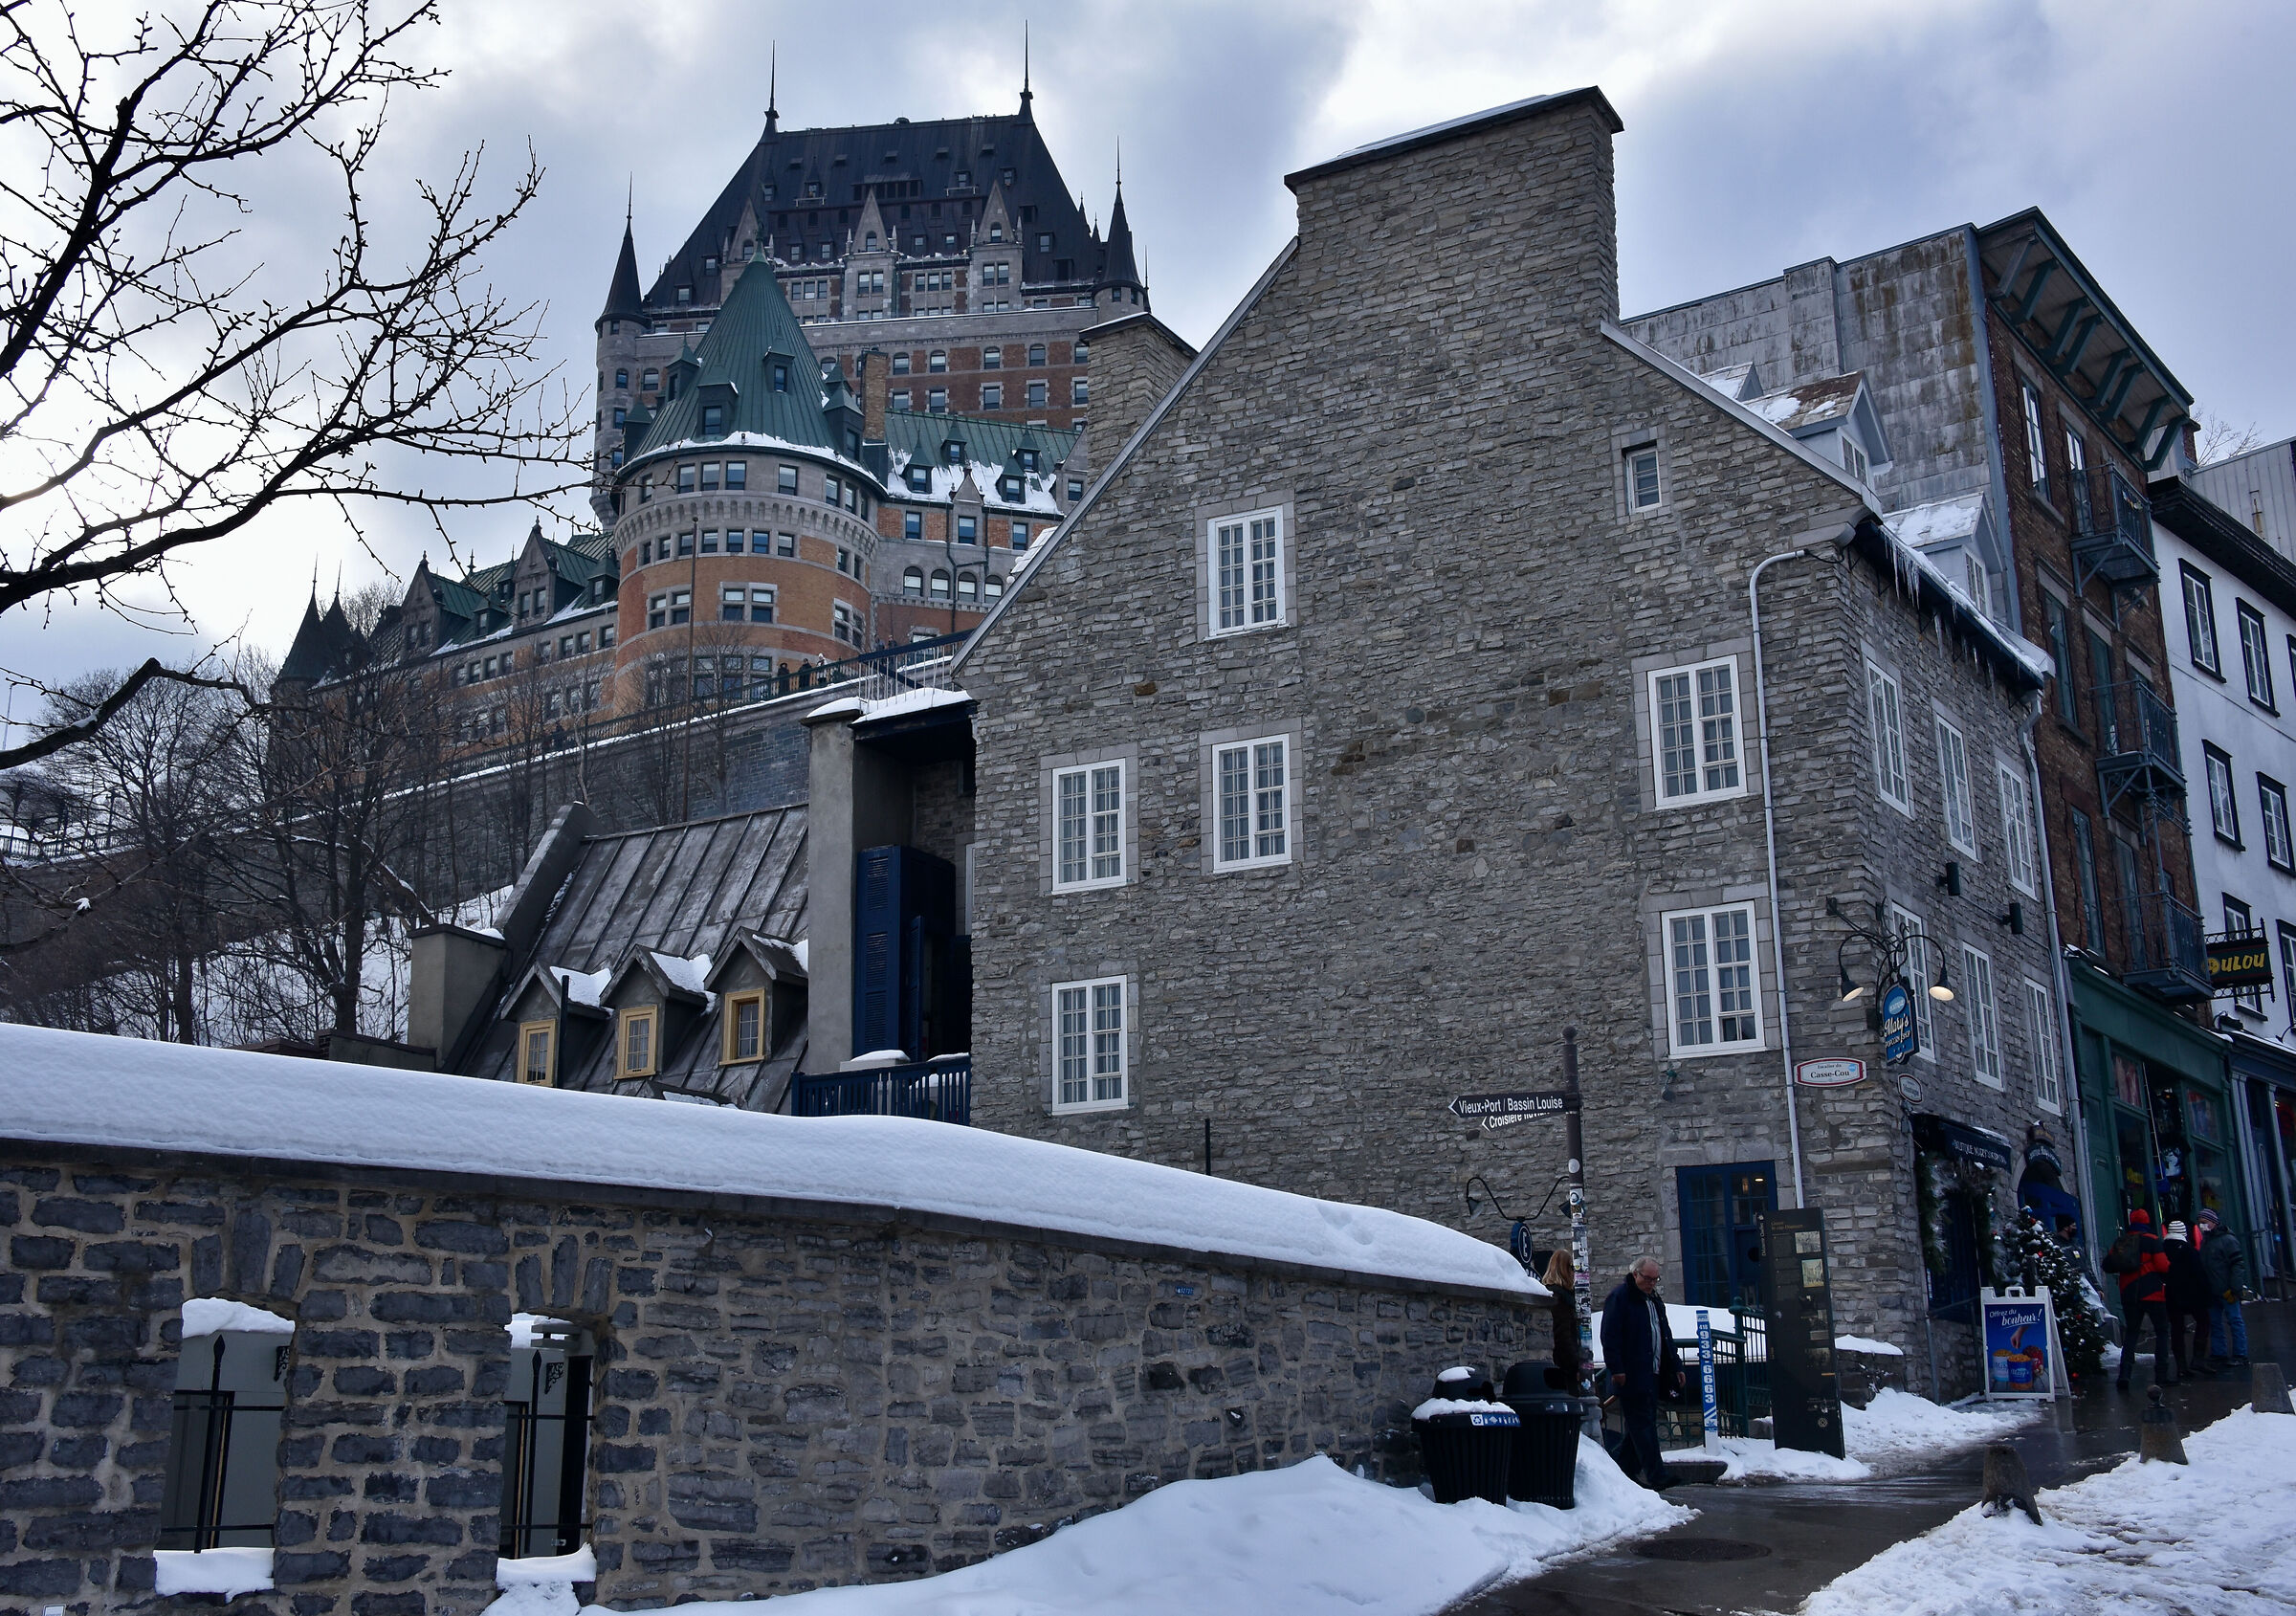 Inside the walls in Old Quebec, Canada...